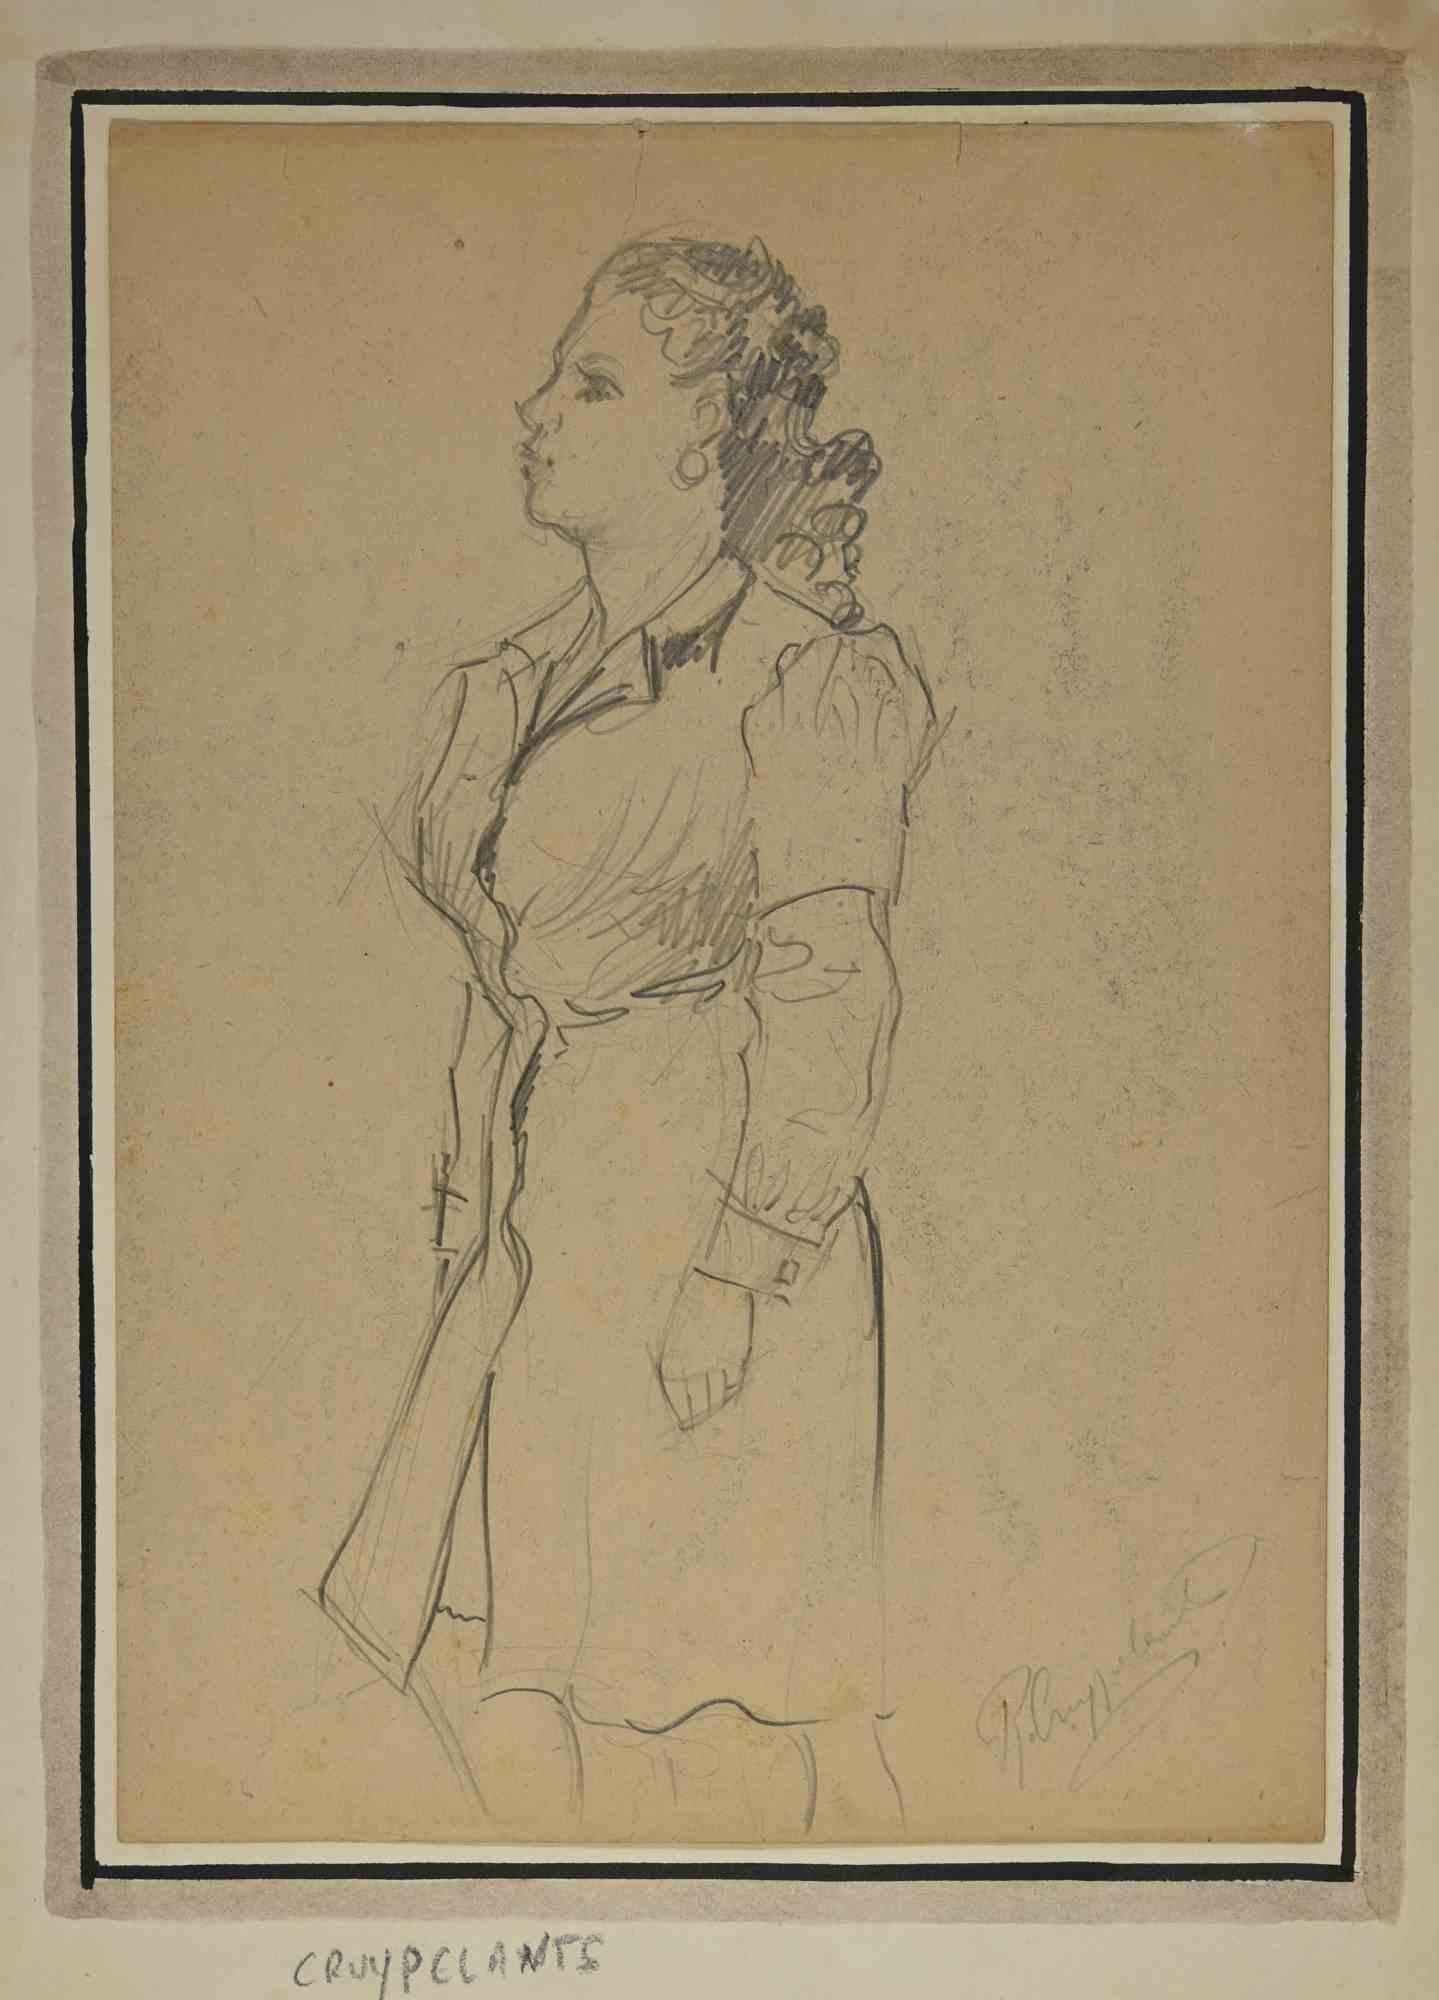 Portrait of a Woman is an Artwork  realized by  the Artist Roland Cruypelants (1882-1947).

Drawing pencil on paper, Hand-signed by the artist on the lower right corner.

The artwork is glued on cardboard. Total dimensions: 42x 31 cm.